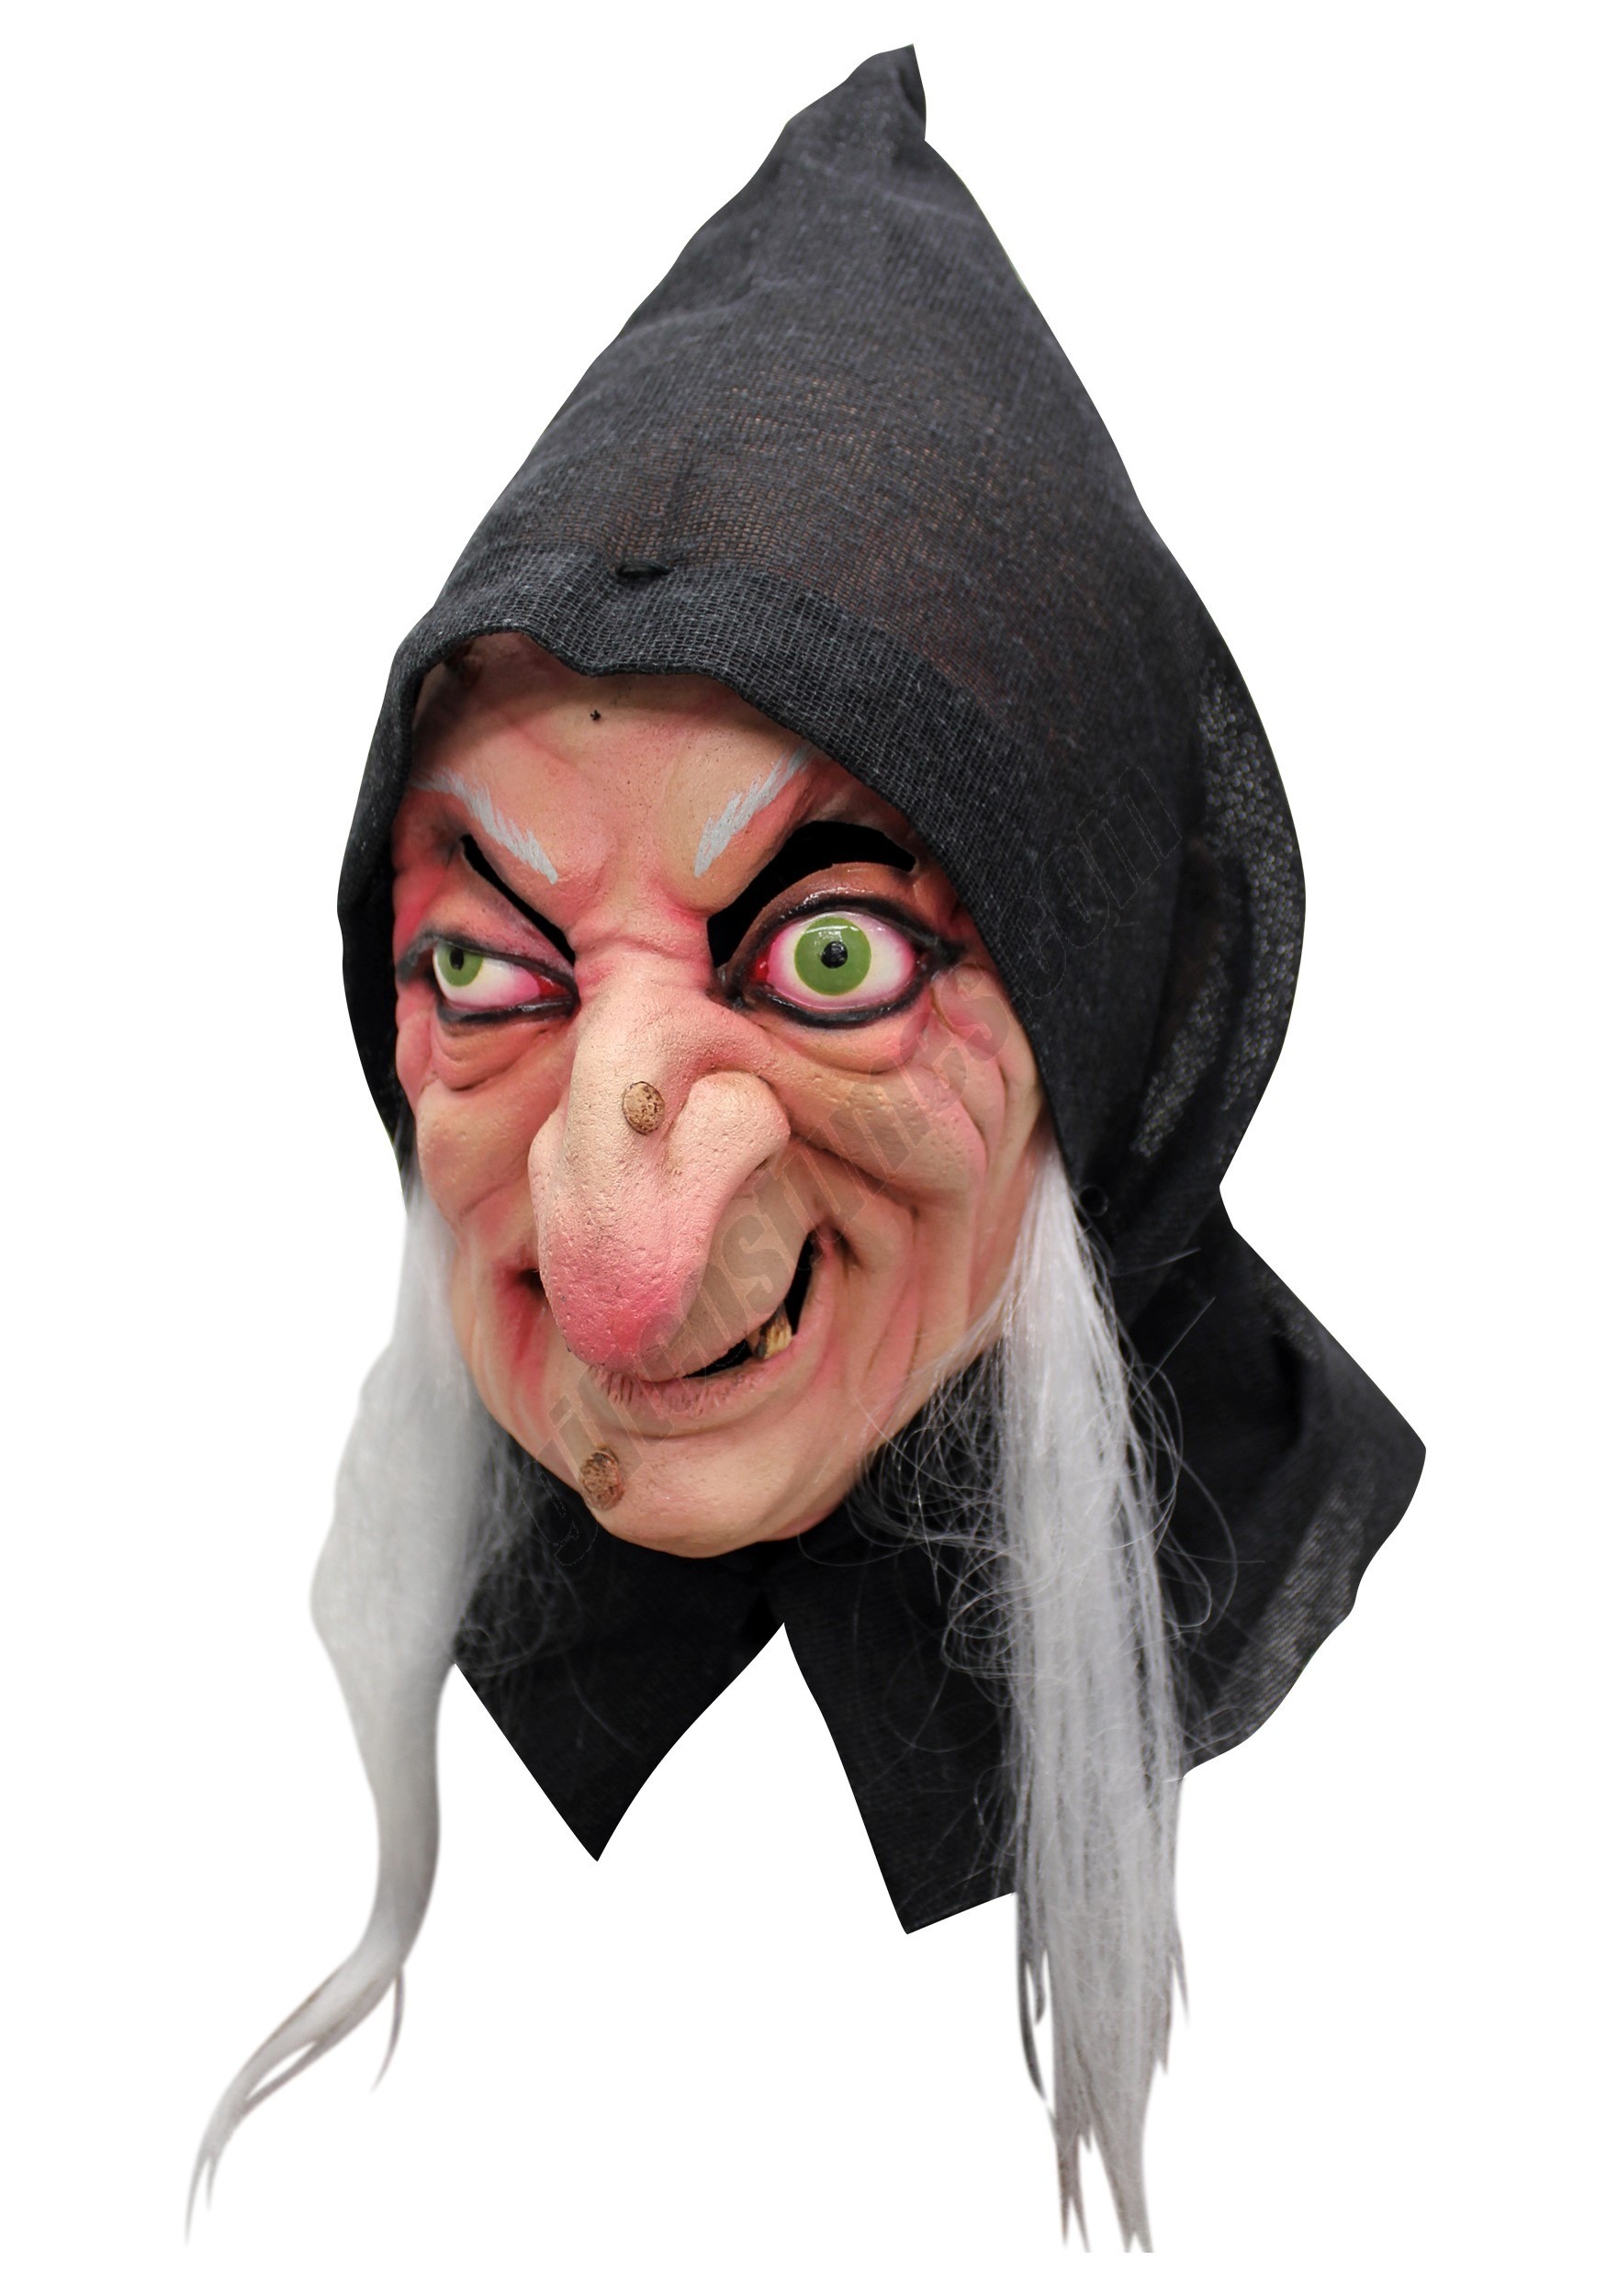 Snow White - Old Hag Witch Mask Promotions - Snow White - Old Hag Witch Mask Promotions